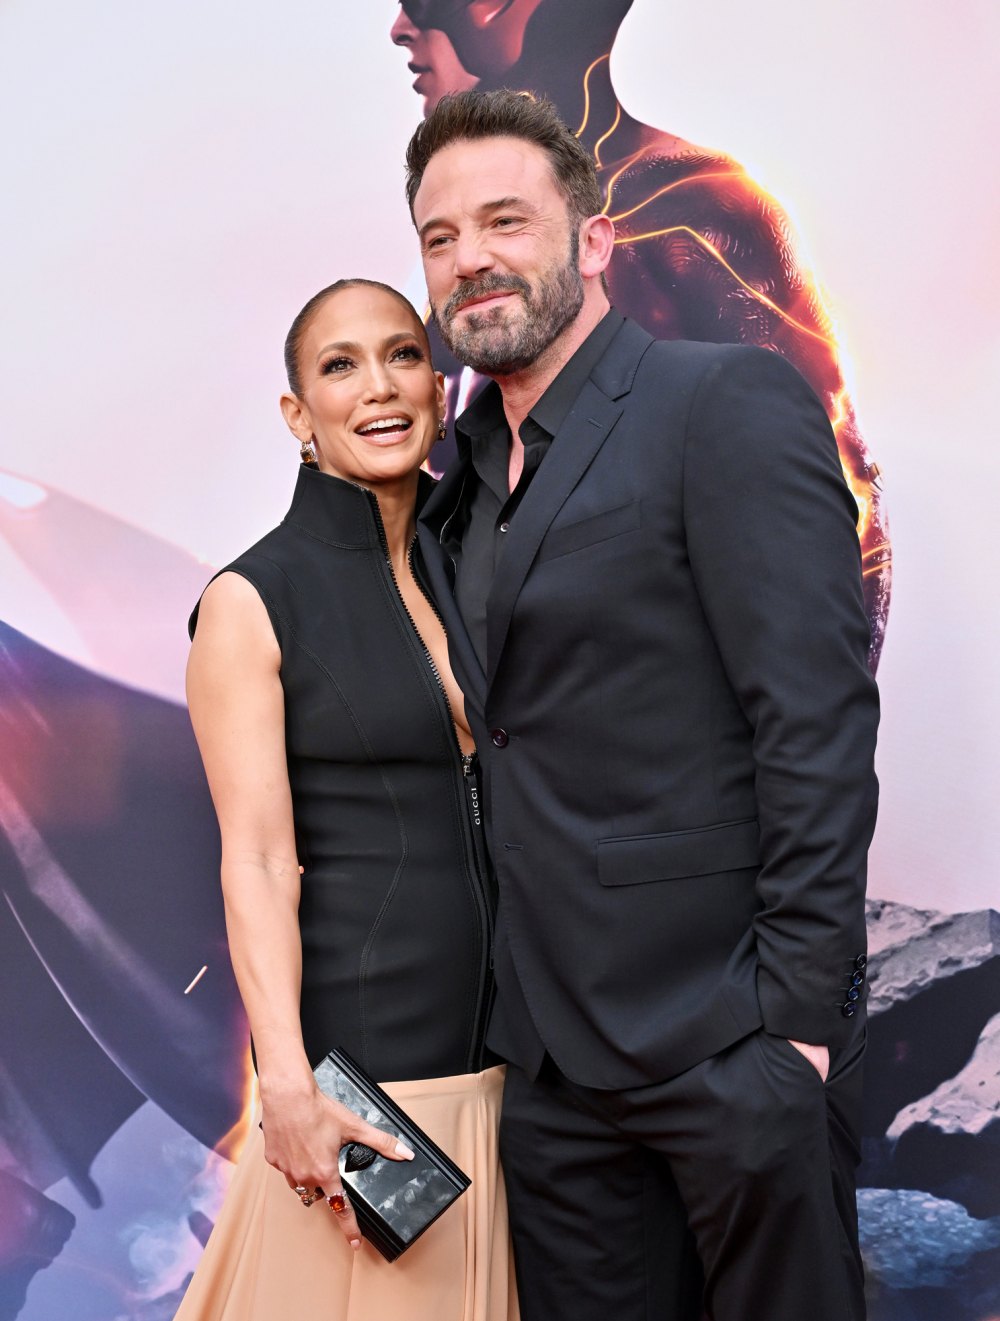 Where to Ben Affleck and Jennifer Lopez Really Hang Out